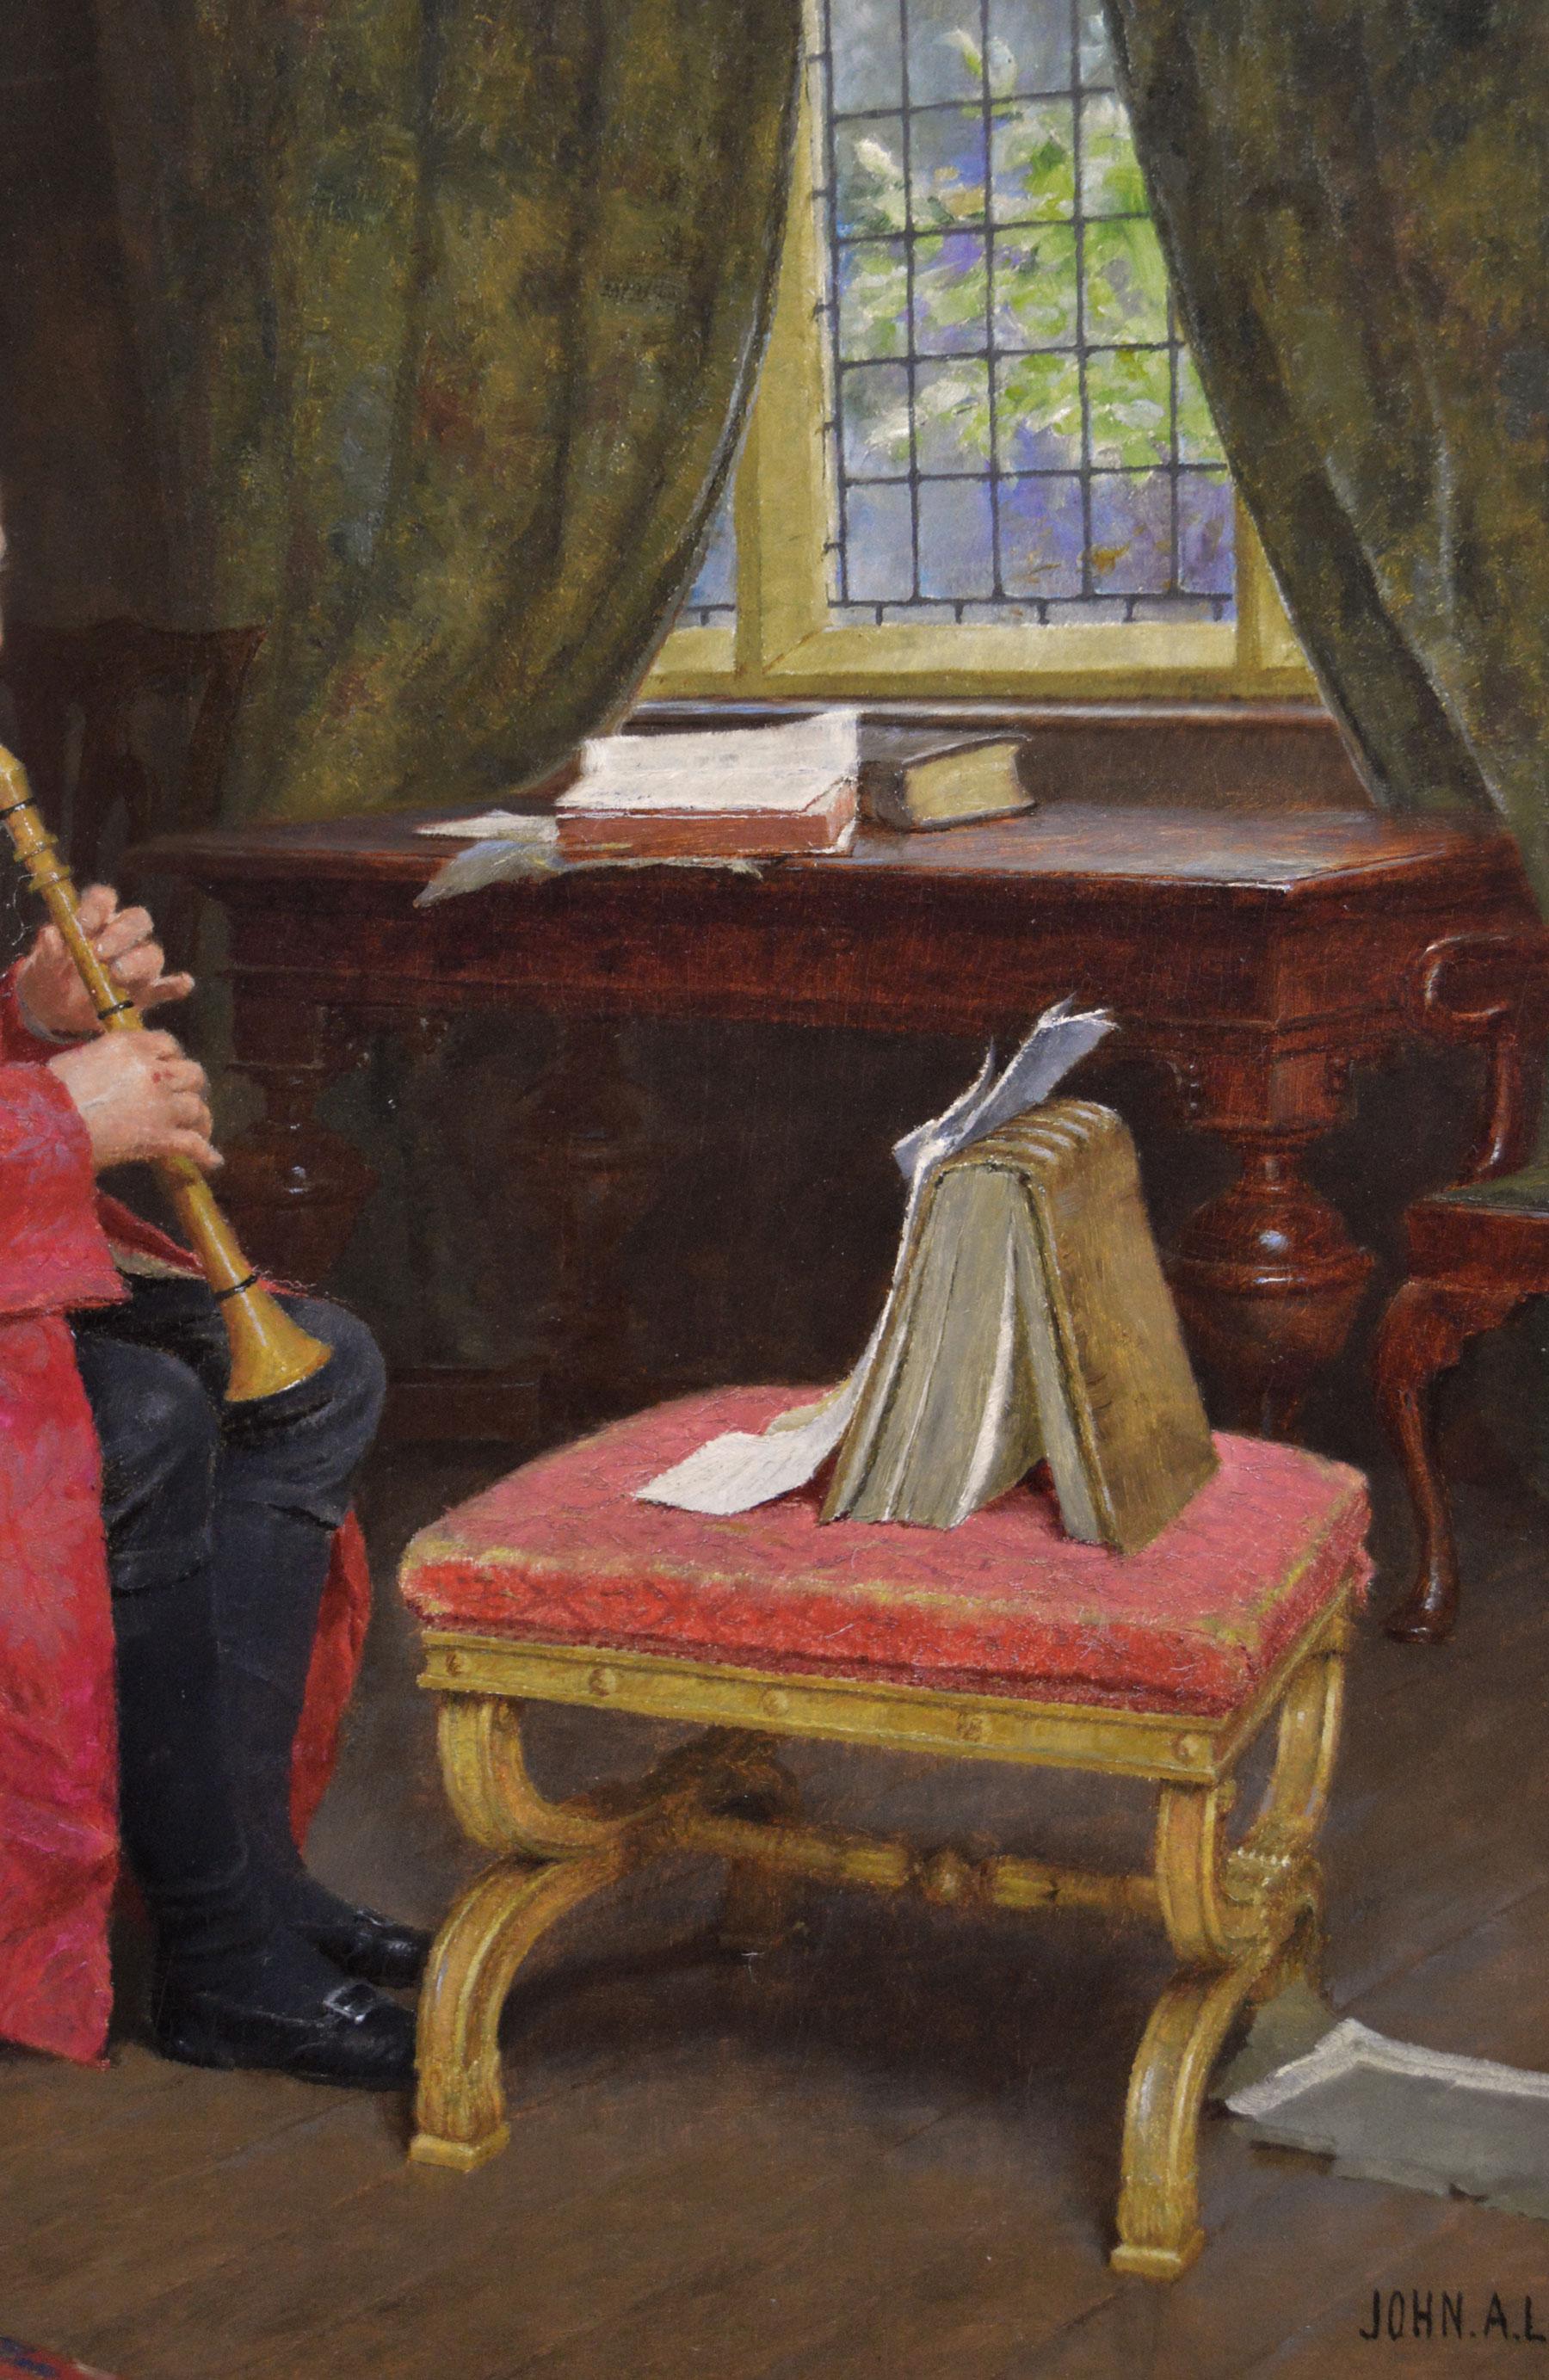 John Arthur Lomax
British, (1857-1923)
The Musician
Oil on panel, signed
Image size: 9.75 inches x 11.75 inches 
Size including frame: 19.75 inches x 21.75 inches
Provenance: Henry. J. Mullen Ltd, The James Street Galleries, Harrogate

A wonderful